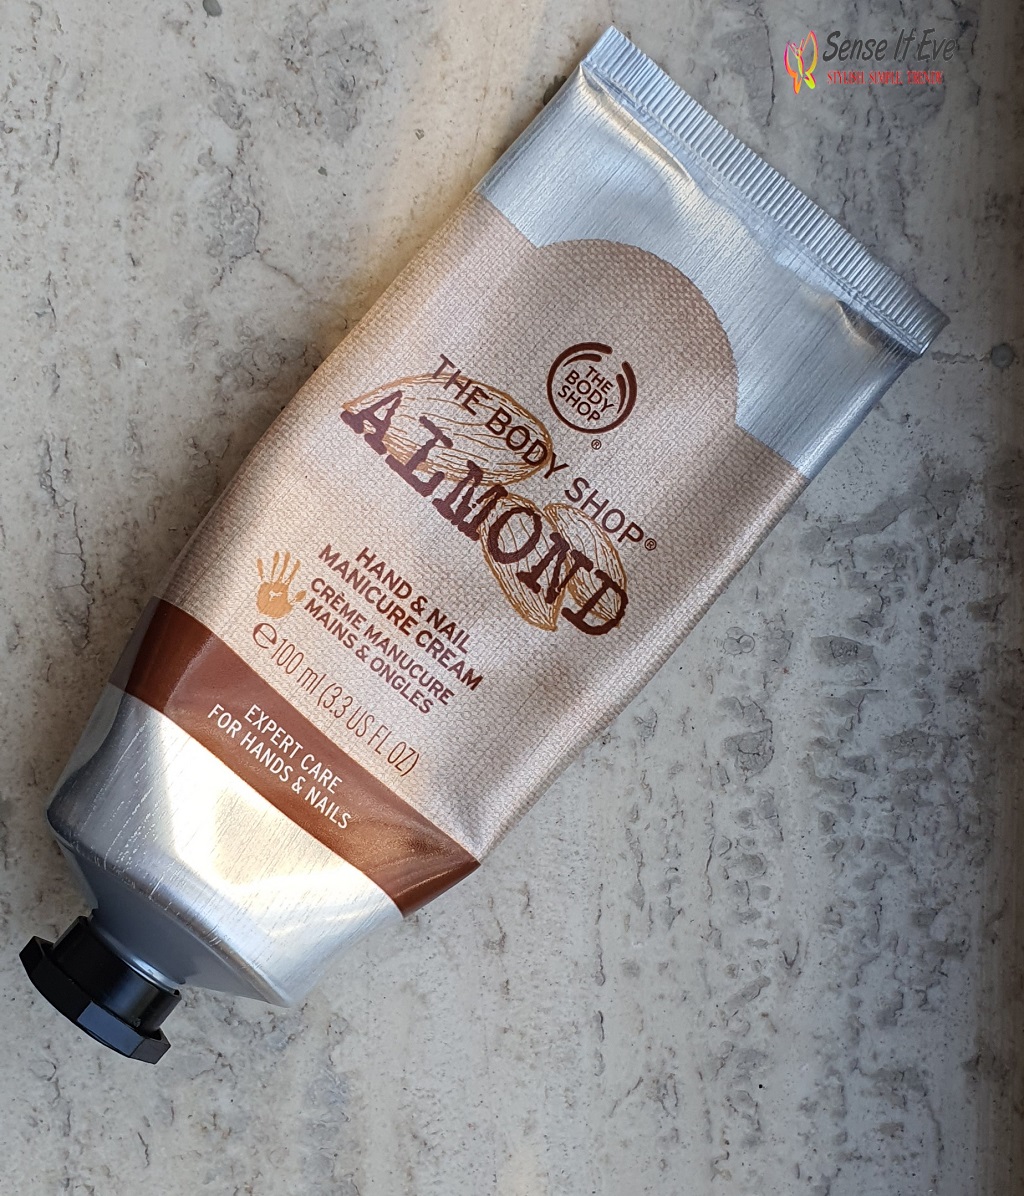 The Body Shop Almond Hand Nail Manicure Cream Review Sense It Eve The Body Shop Almond Hand & Nail Cream Review